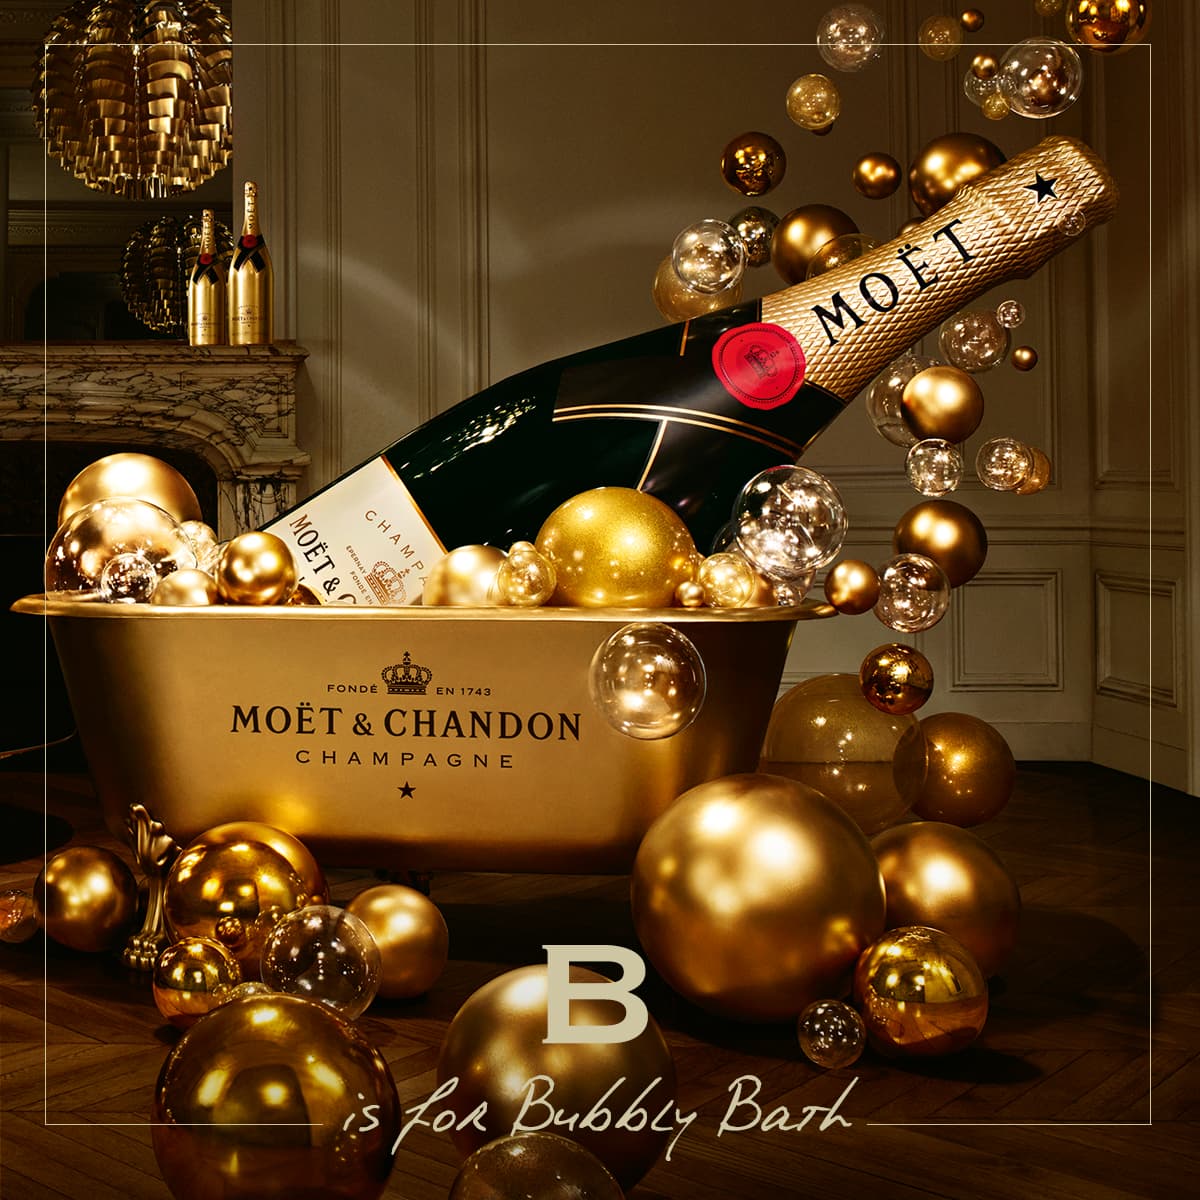 B for Bubbly Bath #MoetMoment